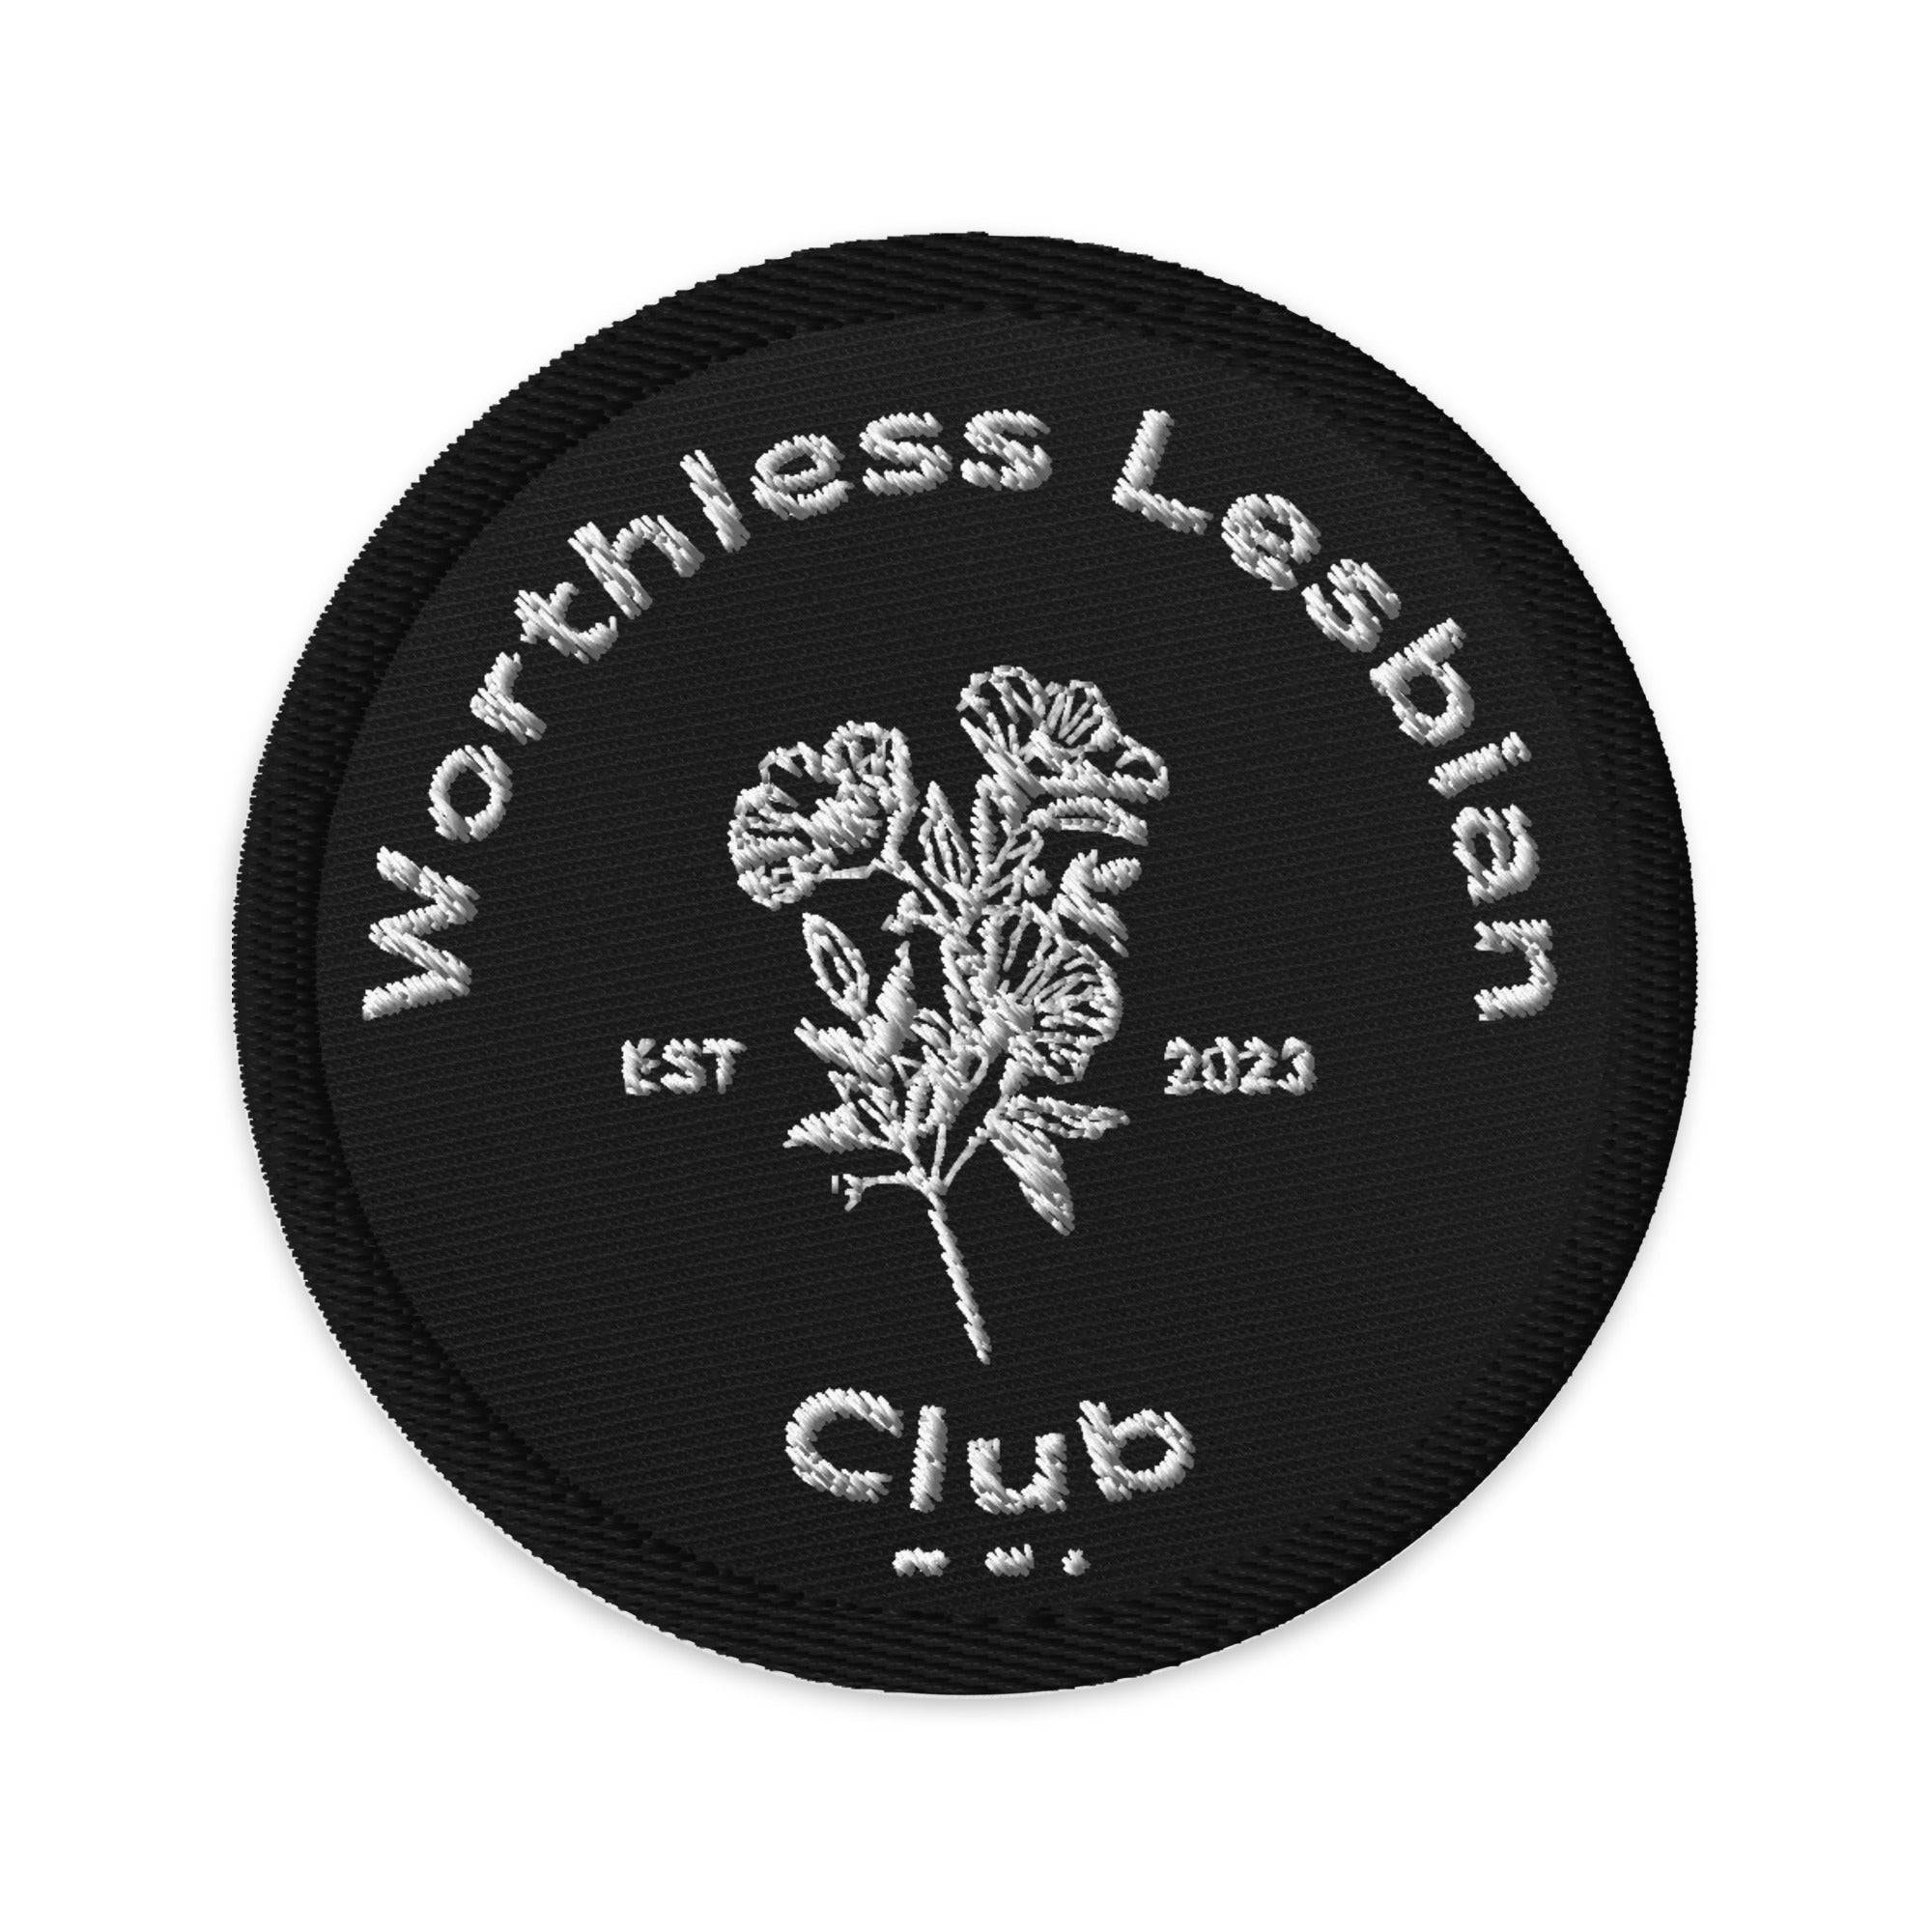 Worthless Lesbian Club Patch Embroidered patch